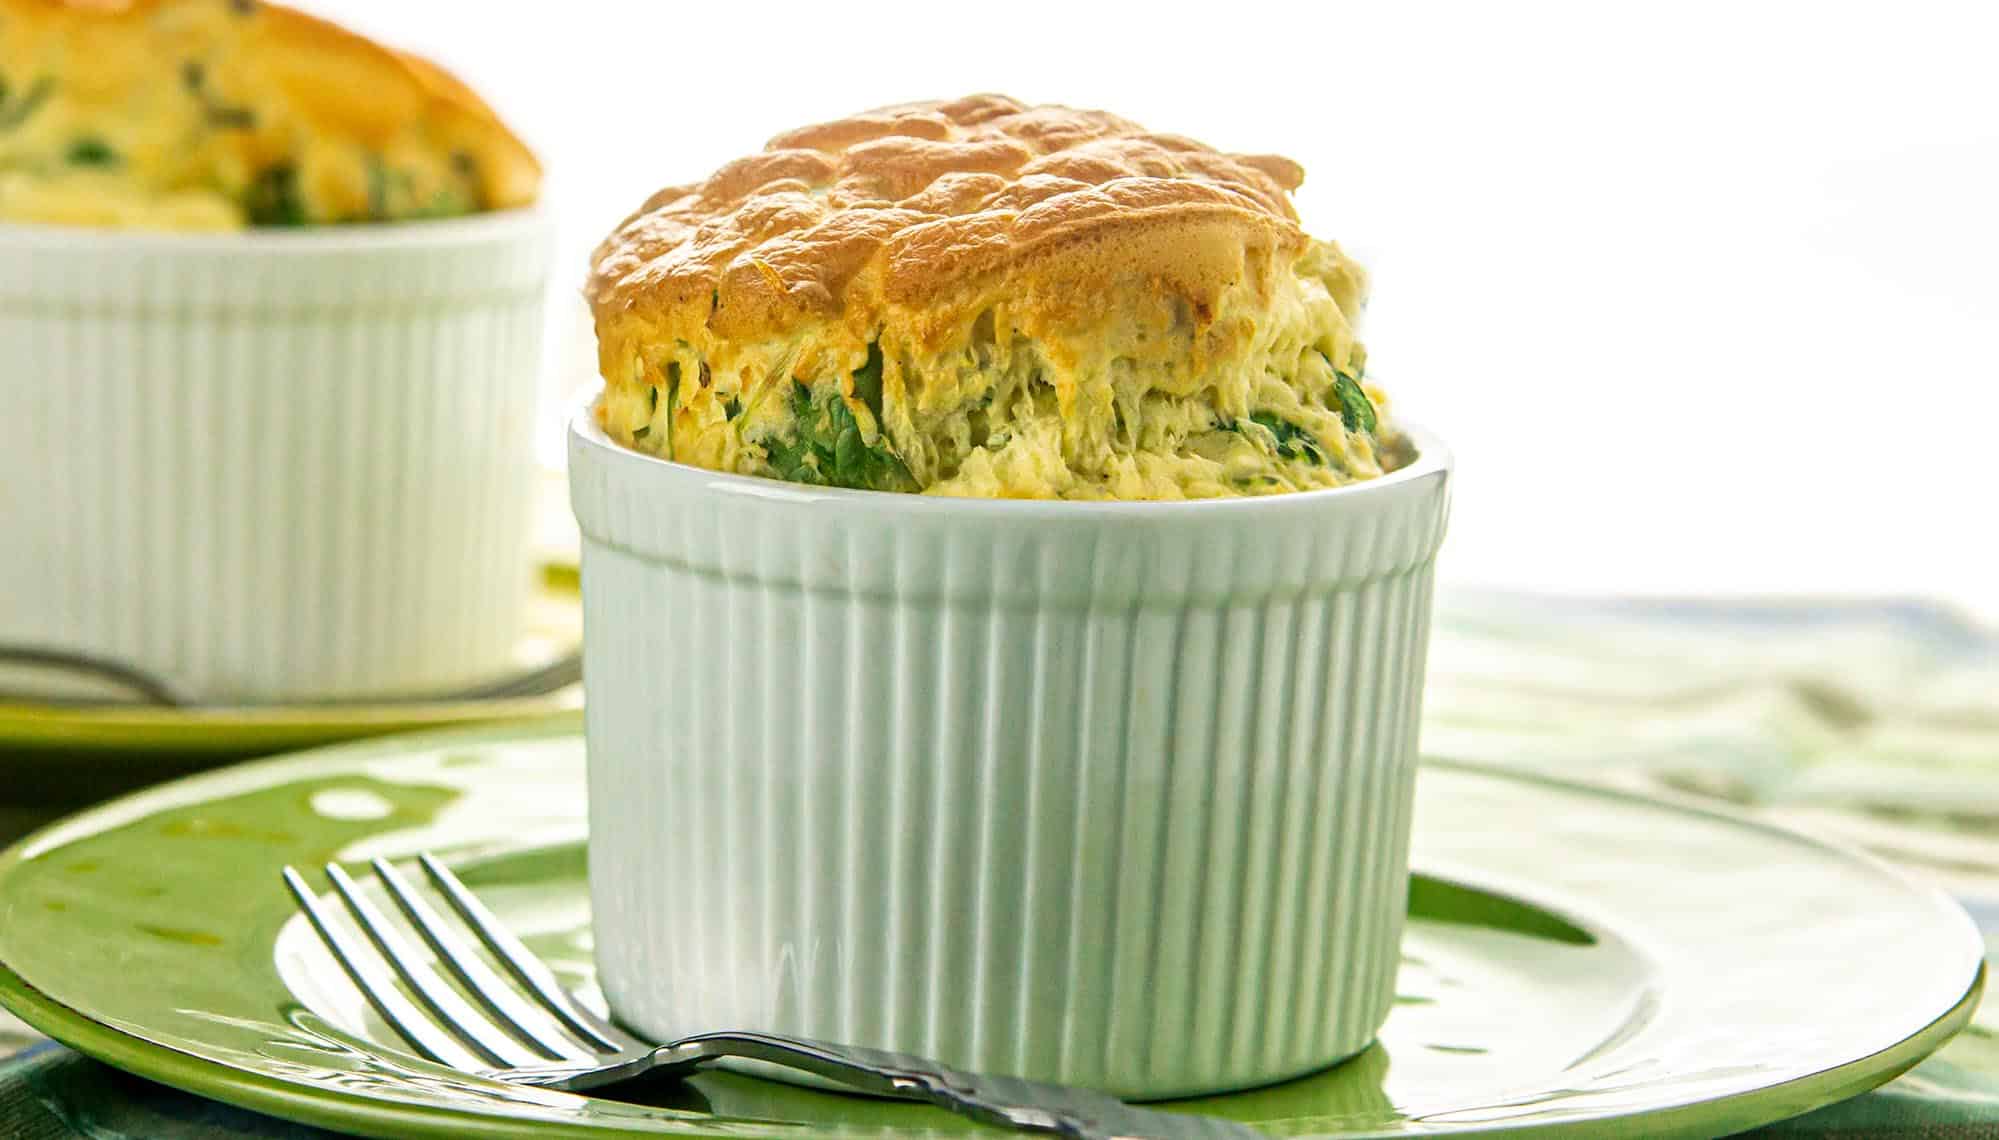 A straight view of air-fried arugula and cheddar egg soufflés in a ramekin above a green plate.